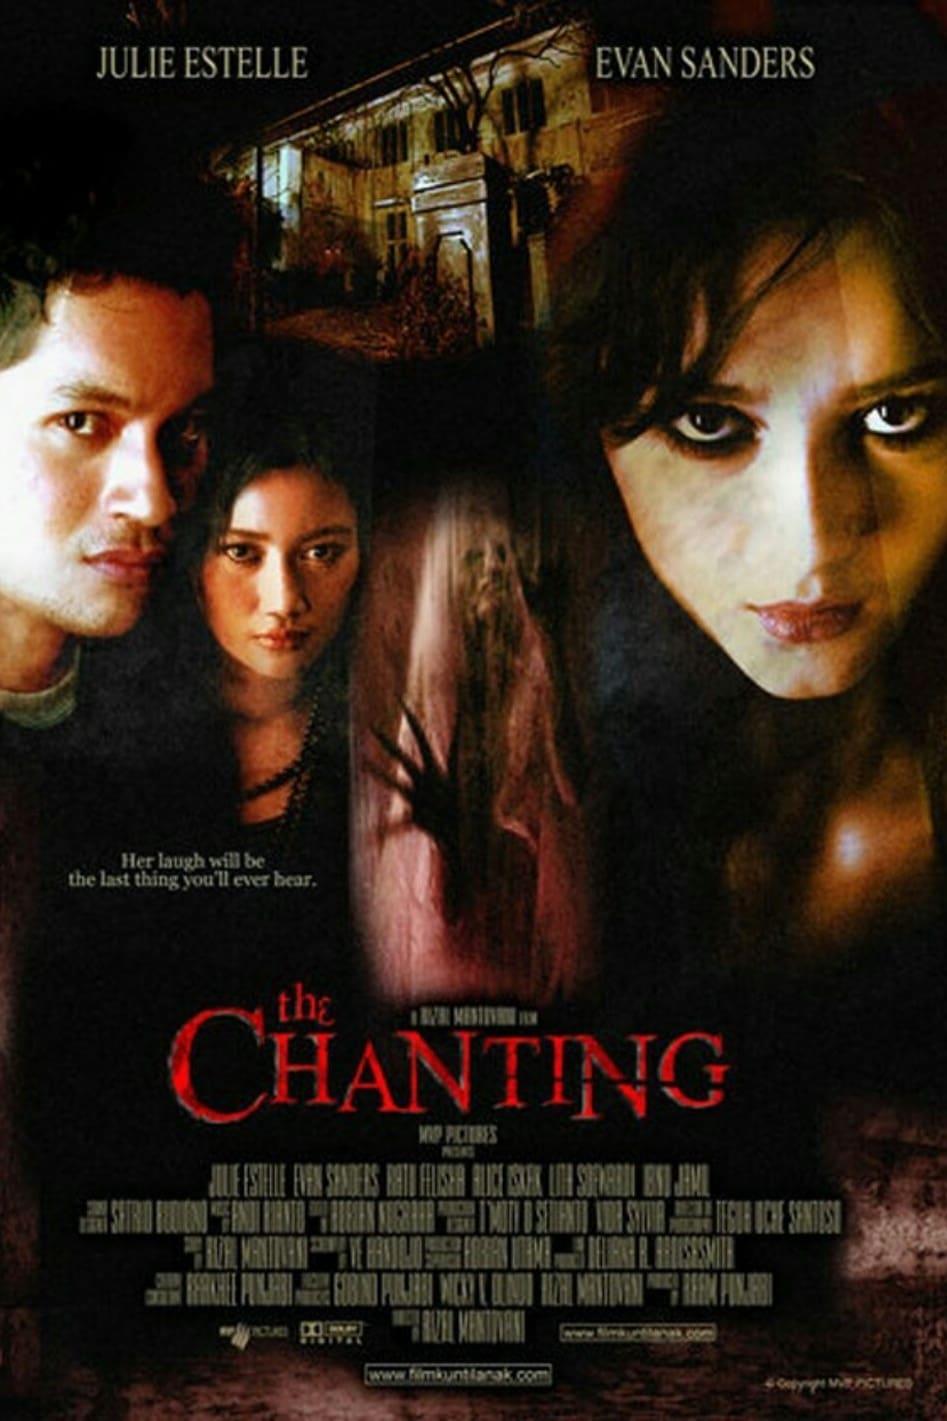 The Chanting poster